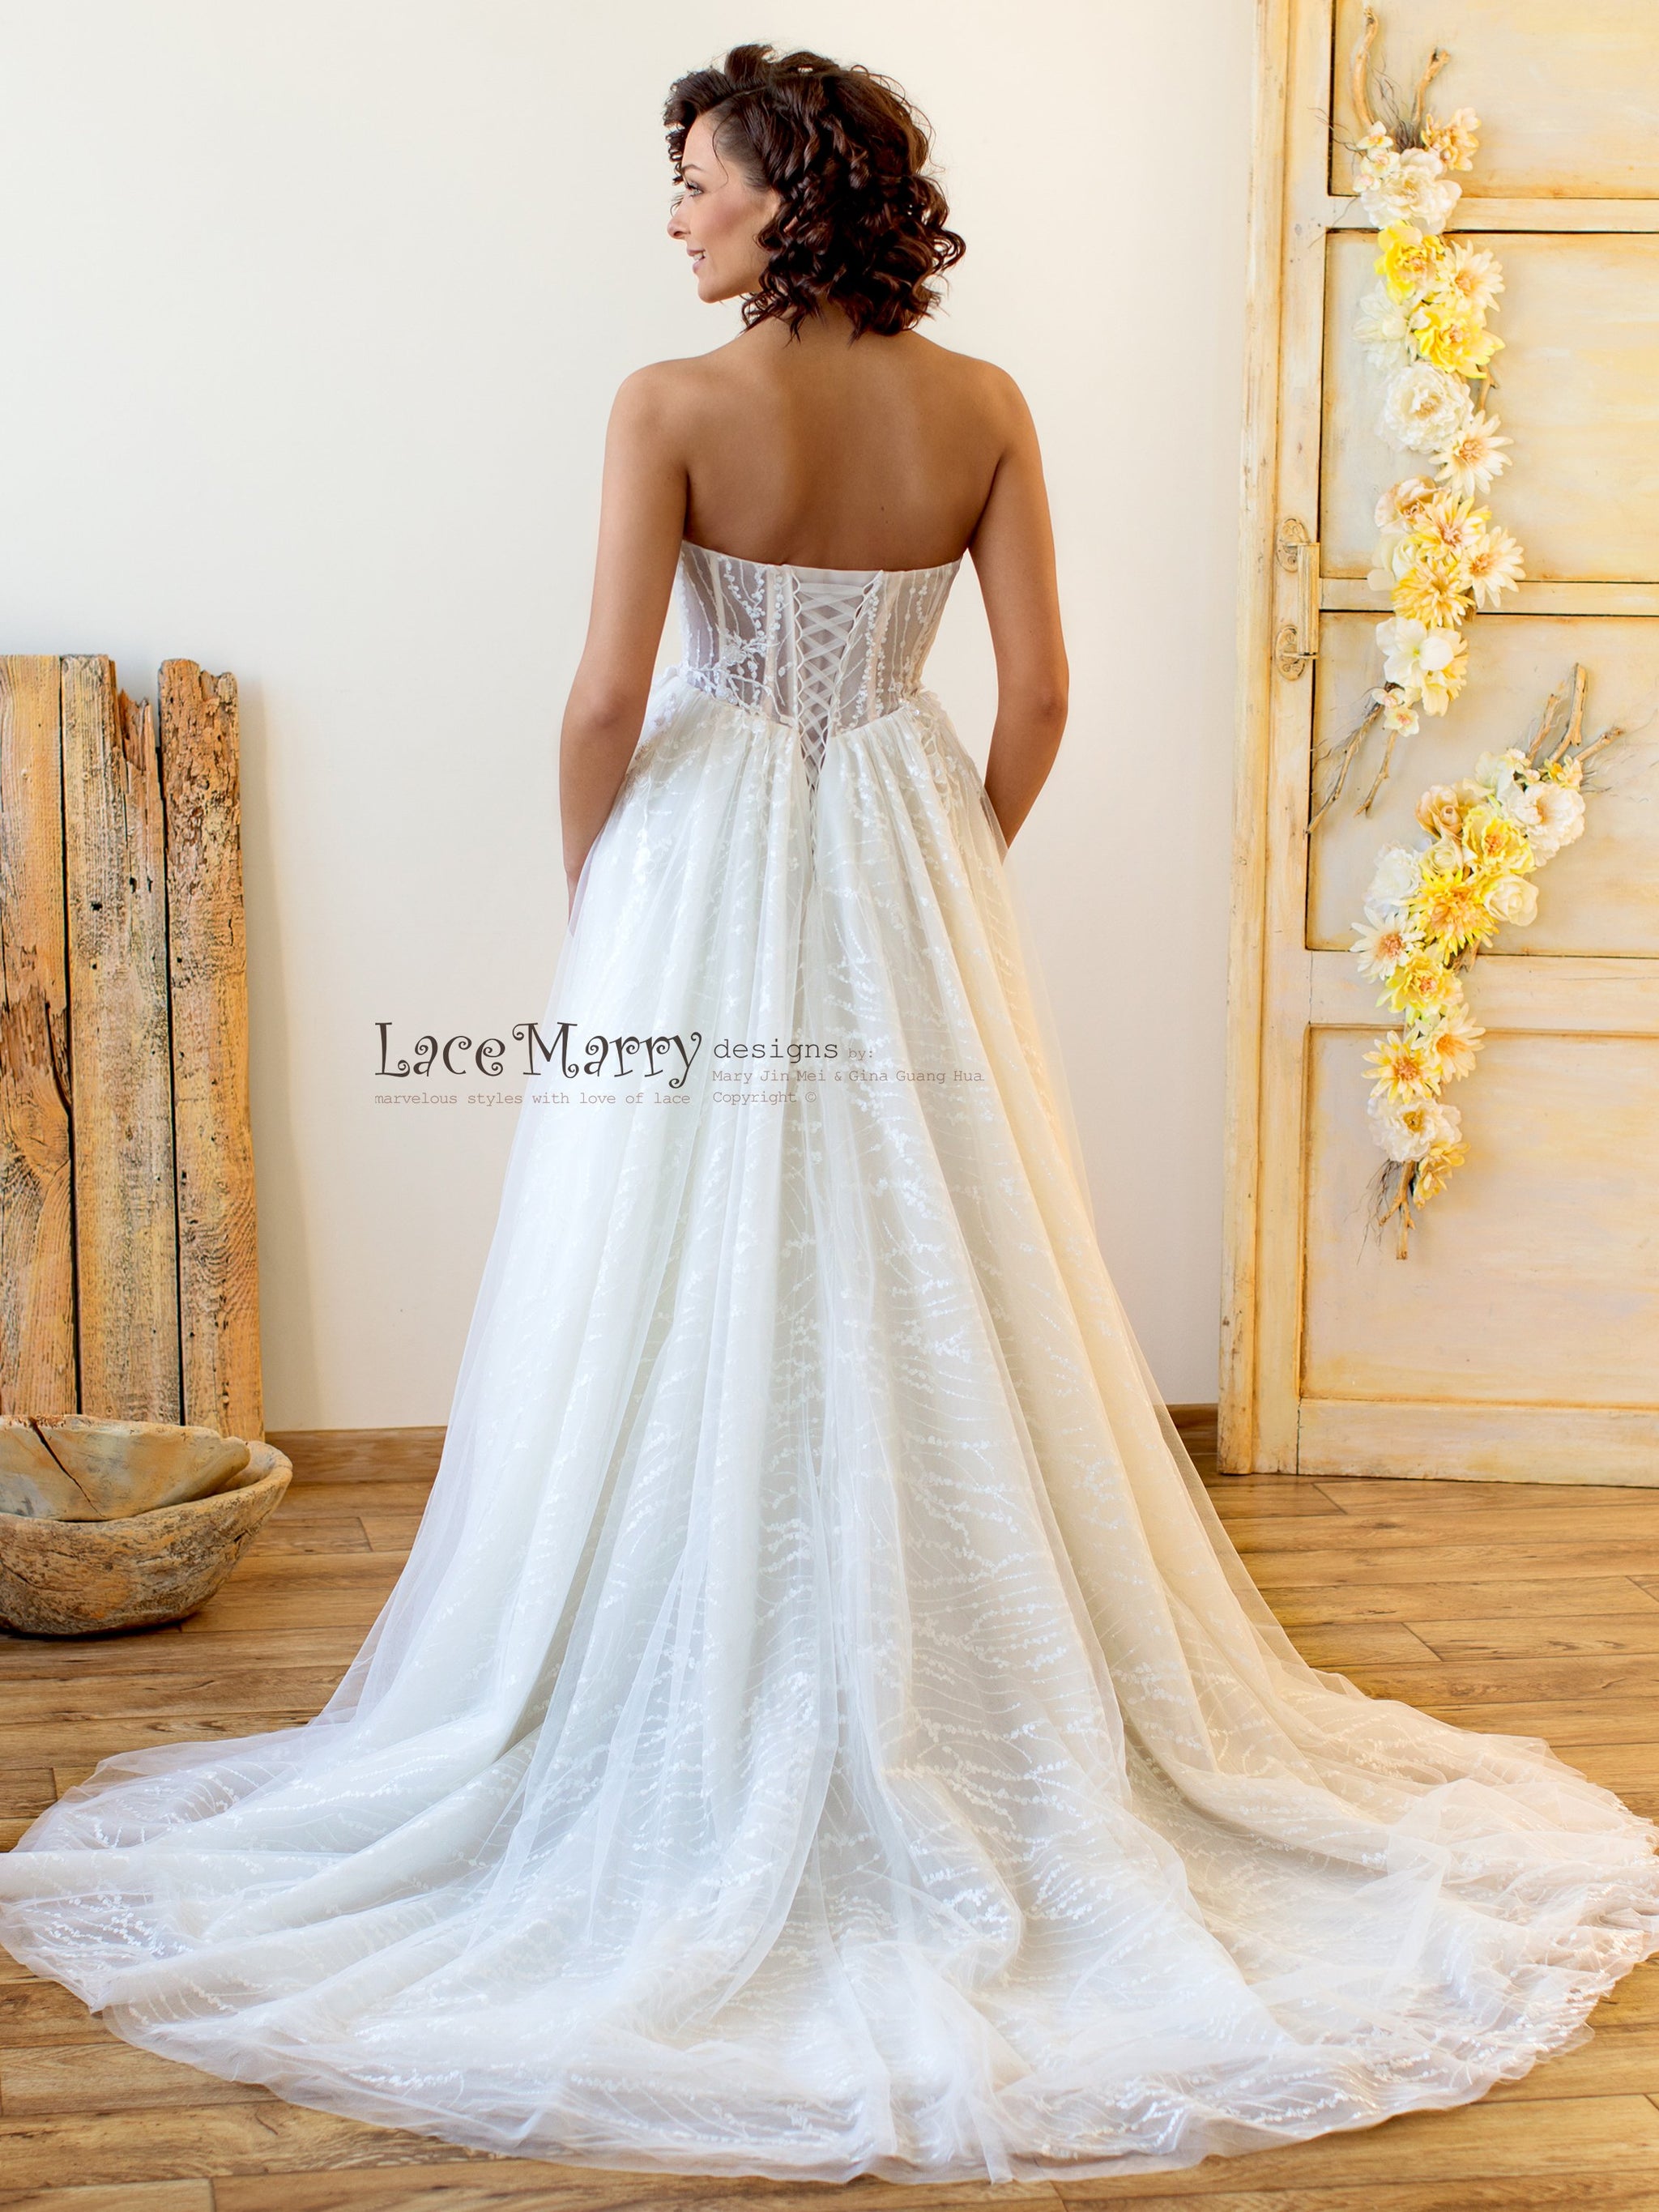 Champagne & Ivory A-Line Wedding Dress with Delicate Lace Embellishments  and Spaghetti Straps Bridal Dress african dresses - AliExpress